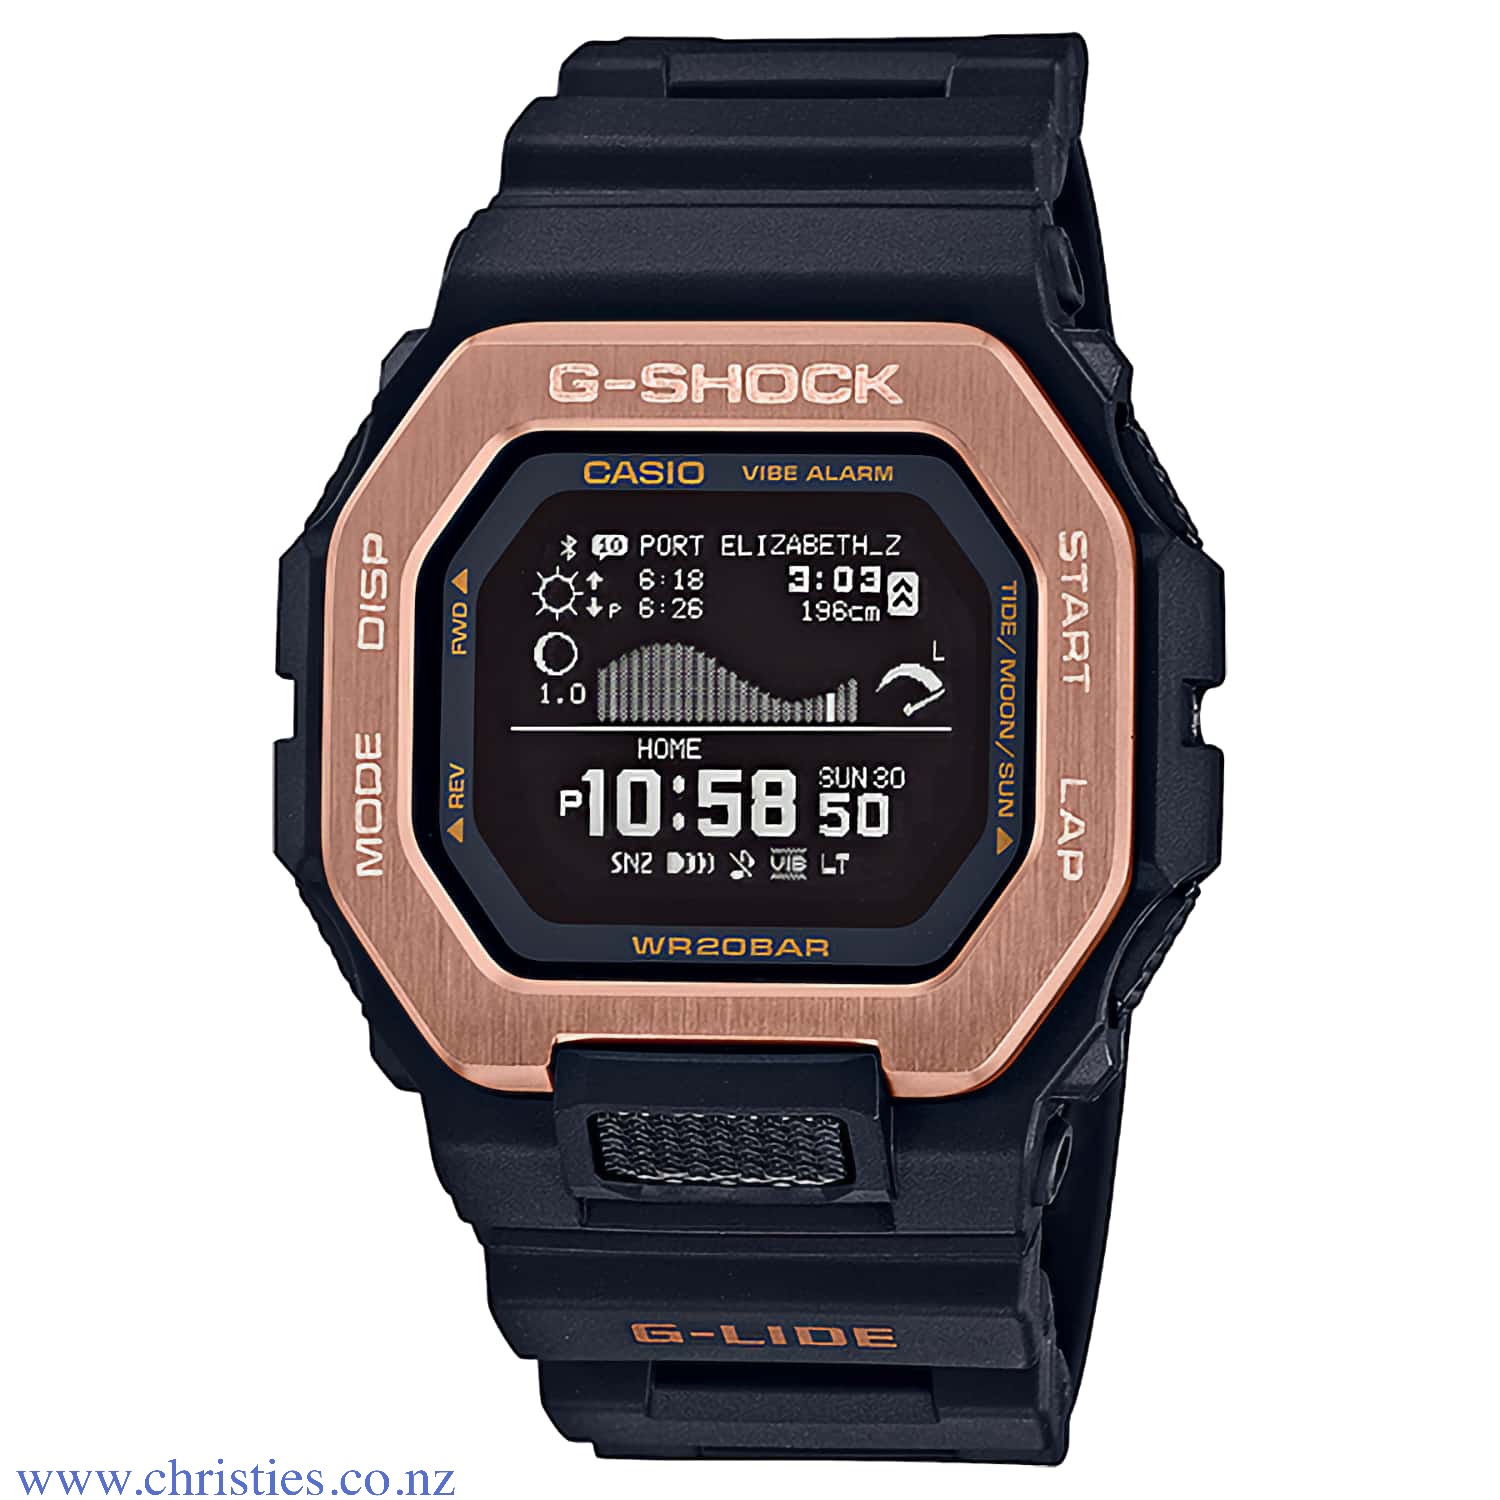 GBX100NS-4 G-Shock G-LIDE Night Surfing Watch. From the G-LIDE Series of G-SHOCK extreme sports watches comes a pair of new models that add night surfing designs to the GBX-100. This new model comes with the ability to display information required by surf